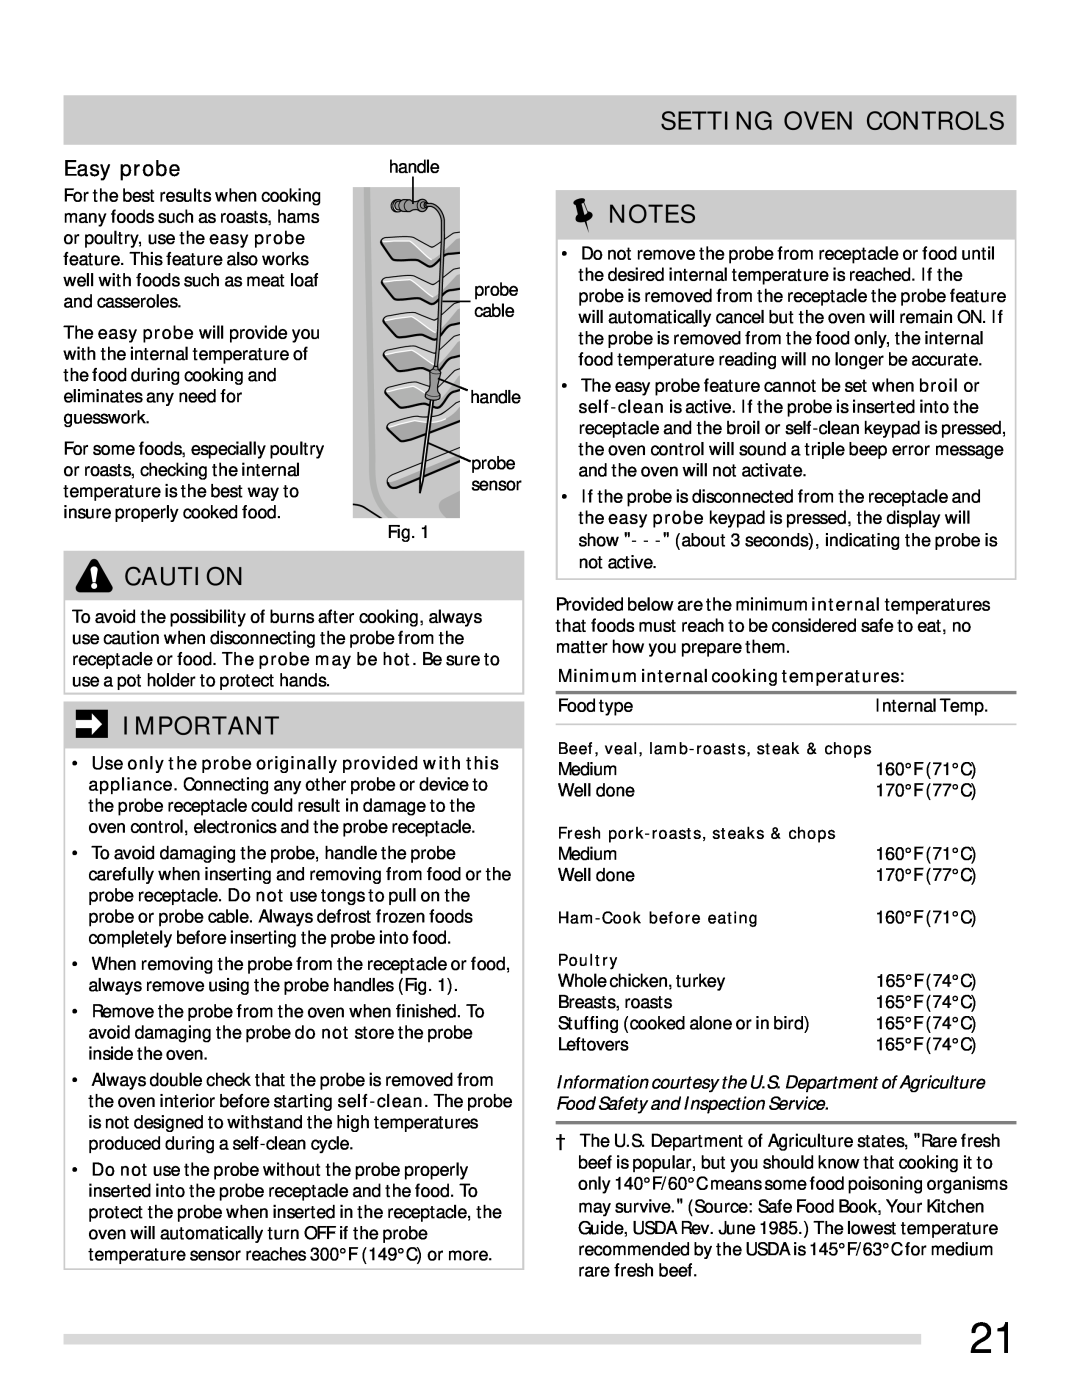 Frigidaire 316902315 important safety instructions Setting Oven Controls Notes, Easy probe 